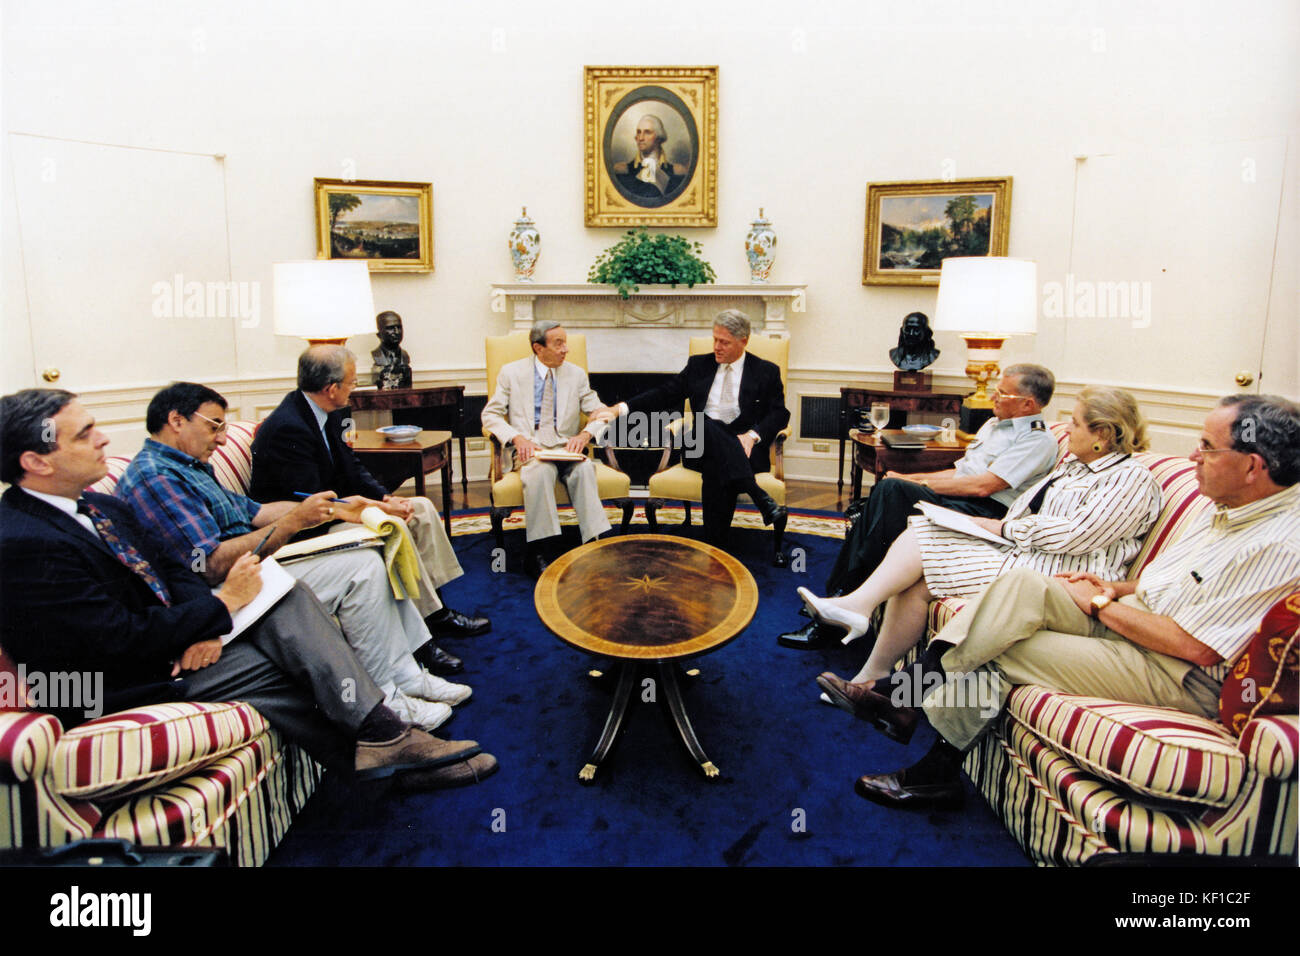 United States President Bill Clinton meets in the Oval Office on July 22, 1995 with (from left to right) CIA Deputy Director George Tenet; Chief of Staff Leon Panetta; National Security Advisor Anthony Lake; US Secretary of State Warren Christopher; Chairman of the Joint Chiefs of Staff General John Shalikashvili; US Ambassador to the United Nations Madeline Albright and US Deputy Secretary of Defense John White. Mandatory Credit: Robert McNeely/White House via CNP - NO WIRE SERVICE - Photo: Robert Mcneely/Consolidated News Photos/Robert McNeely - White House via CNP Stock Photo